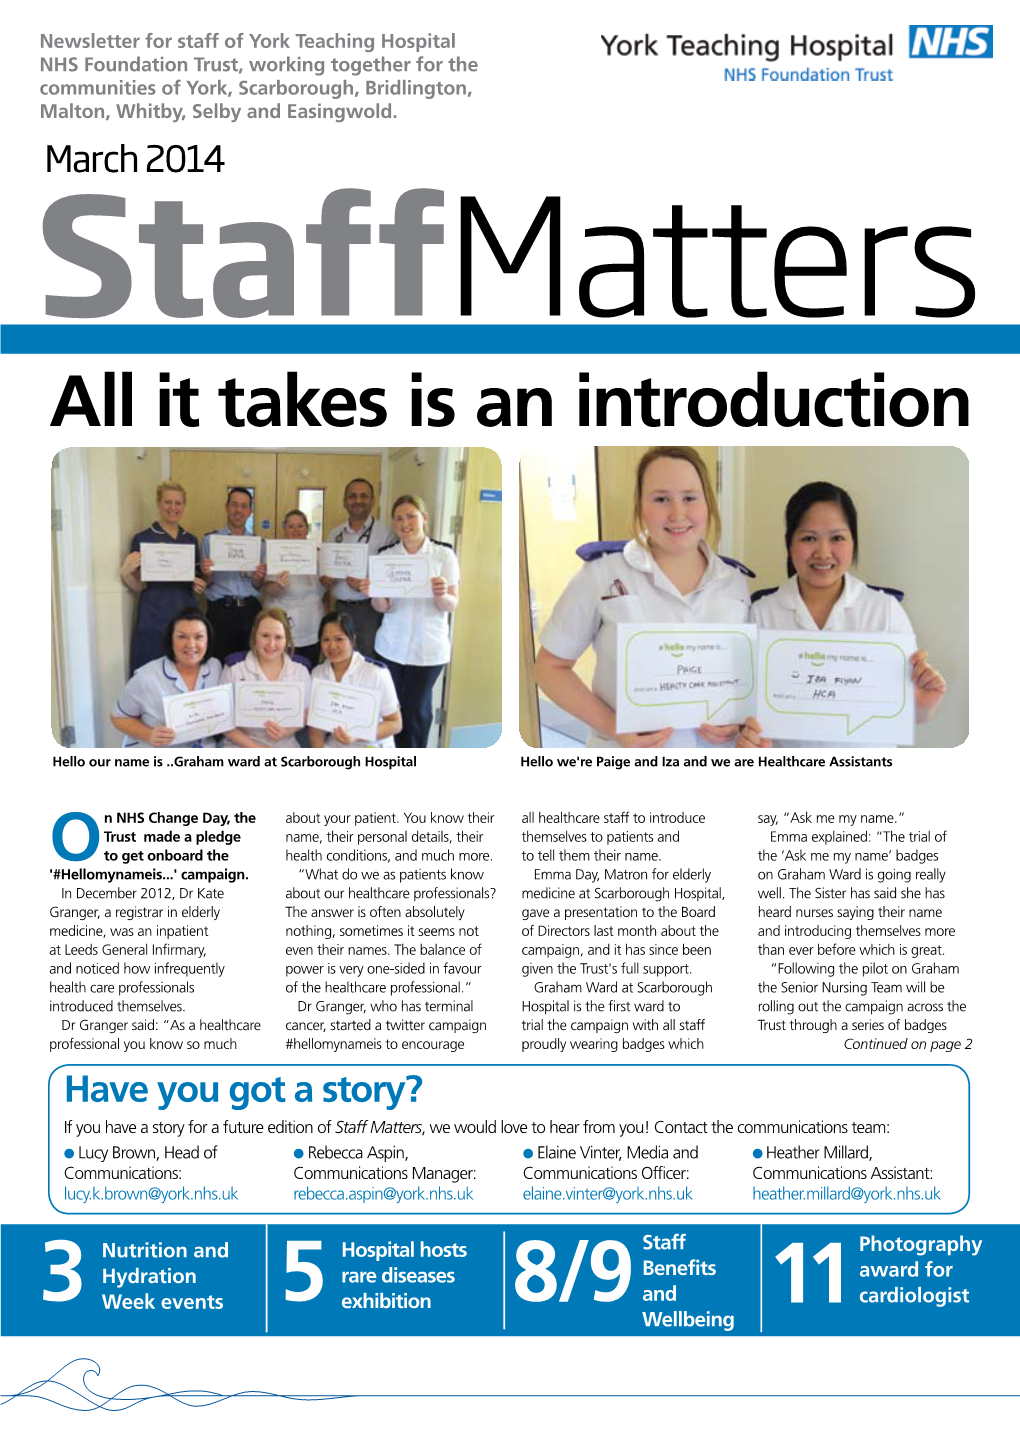 March 2014 Staffmatters All It Takes Is an Introduction